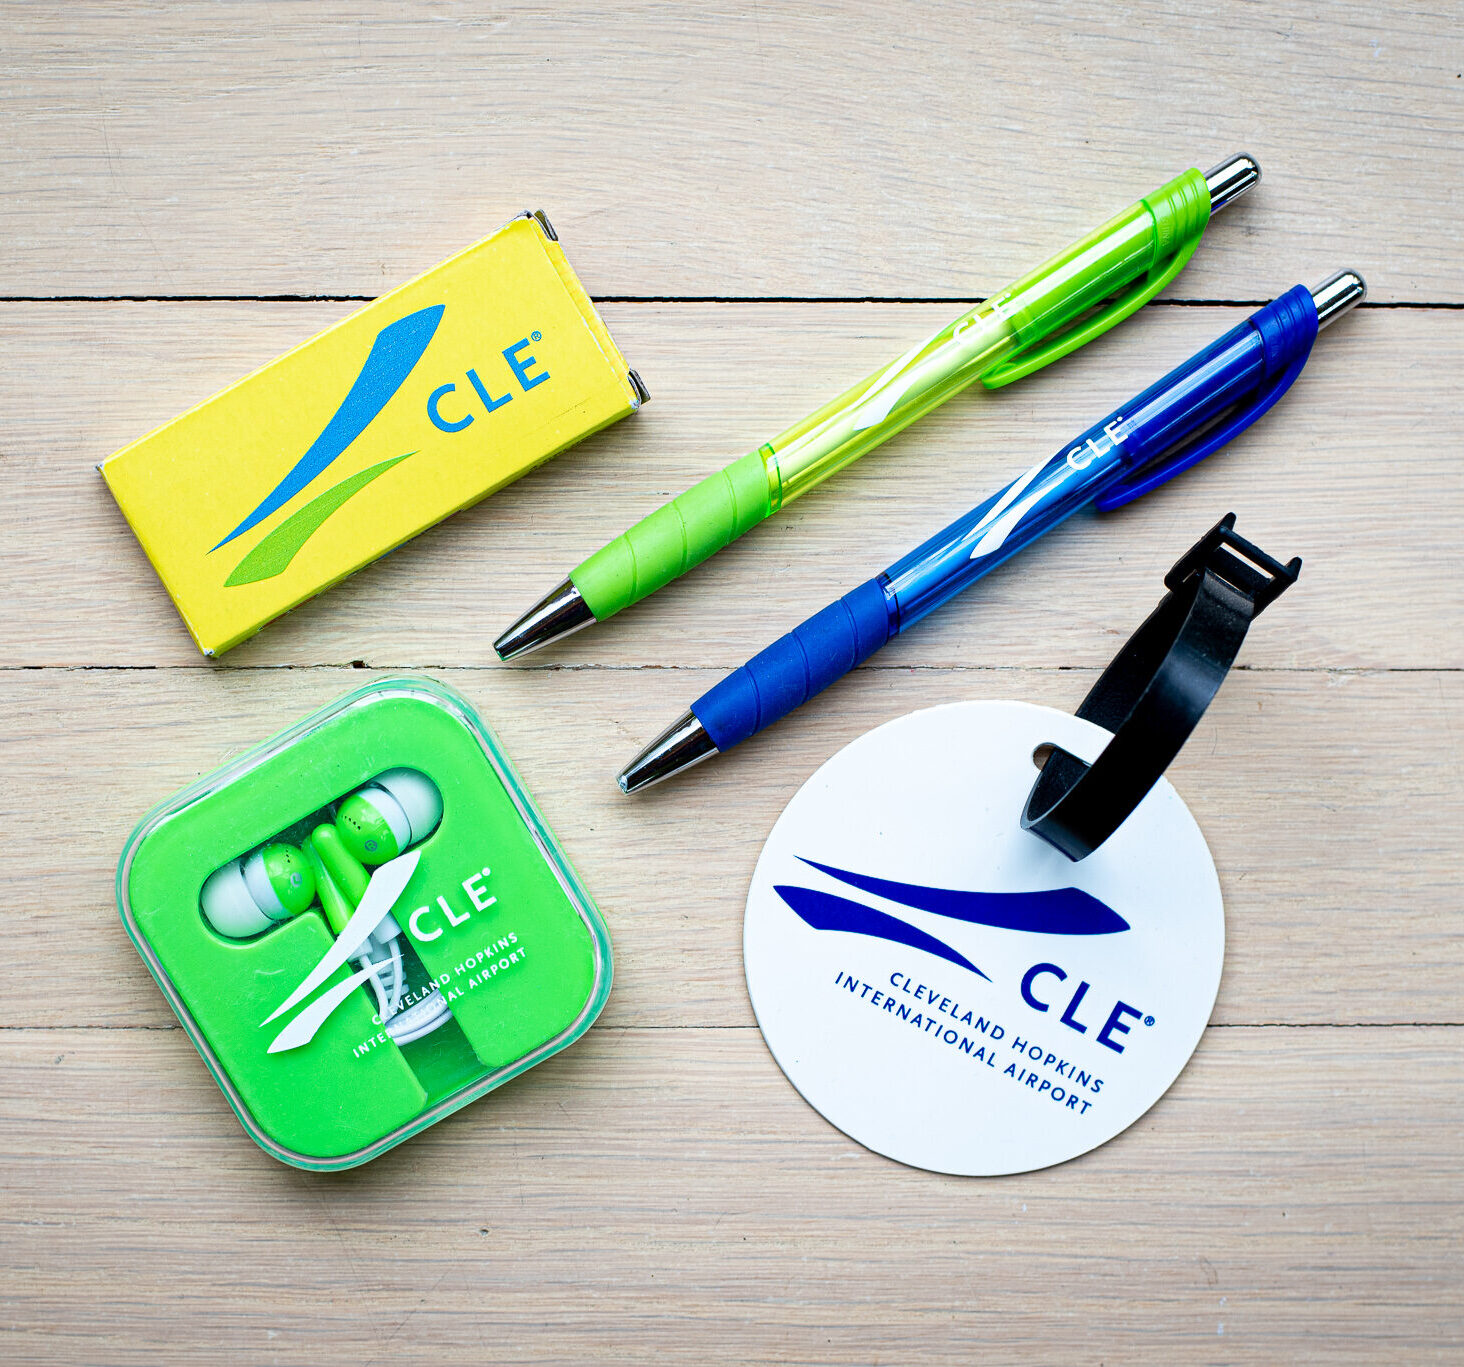 Get custom promotional items for everyday use by consumers.